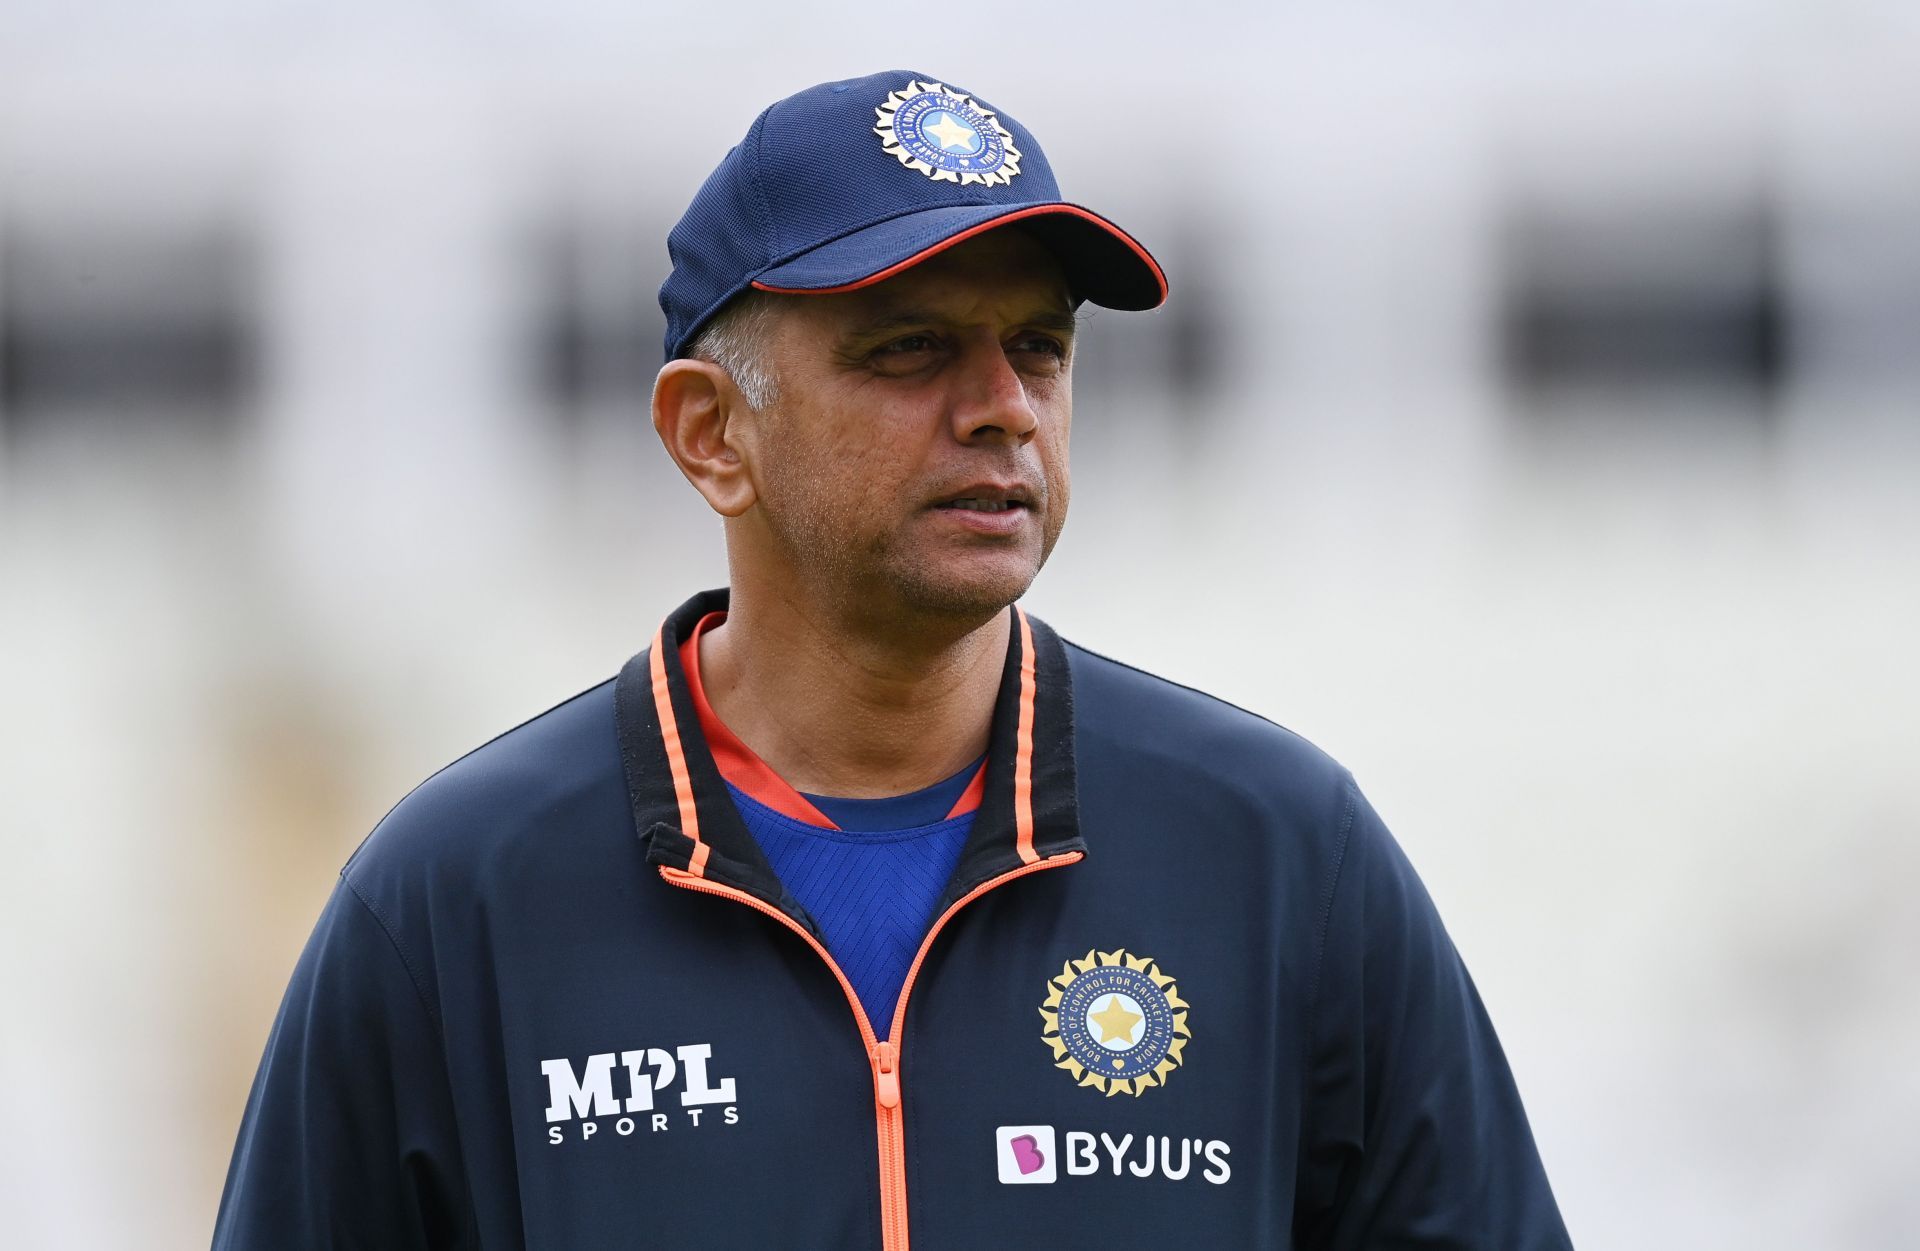 Rahul Dravid is currently the head coach of India (Image courtesy: Getty)